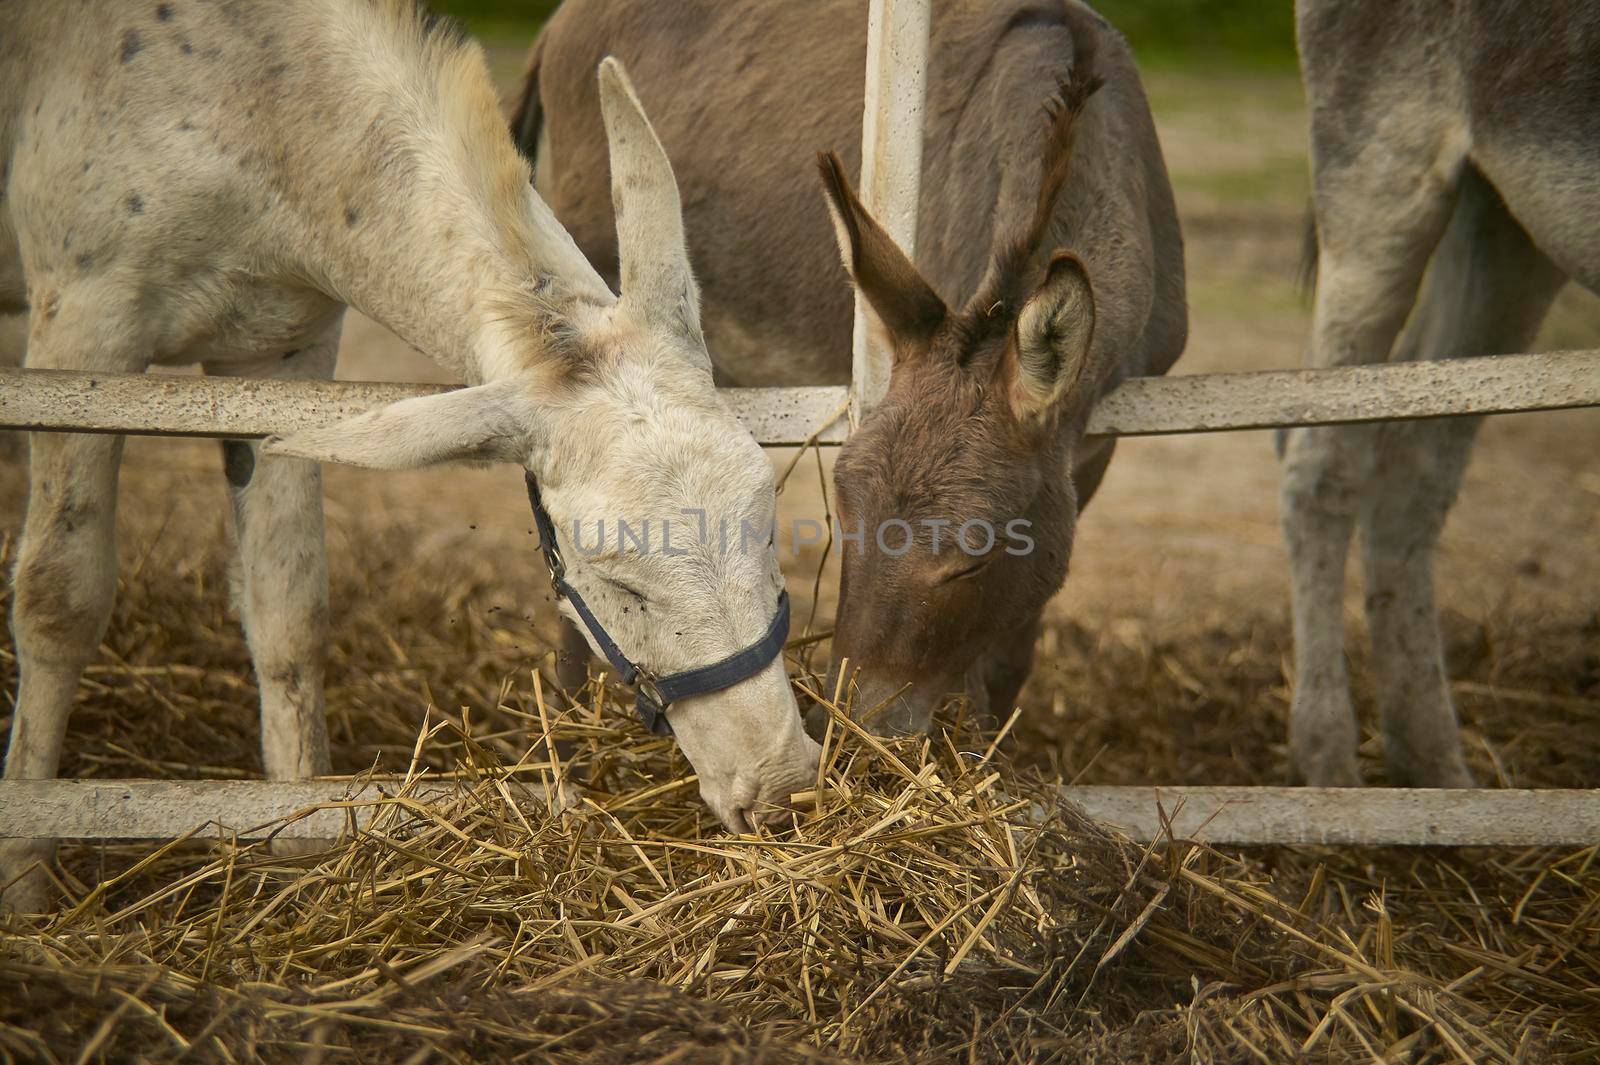 Donkey in the farm enclosure 13 by pippocarlot